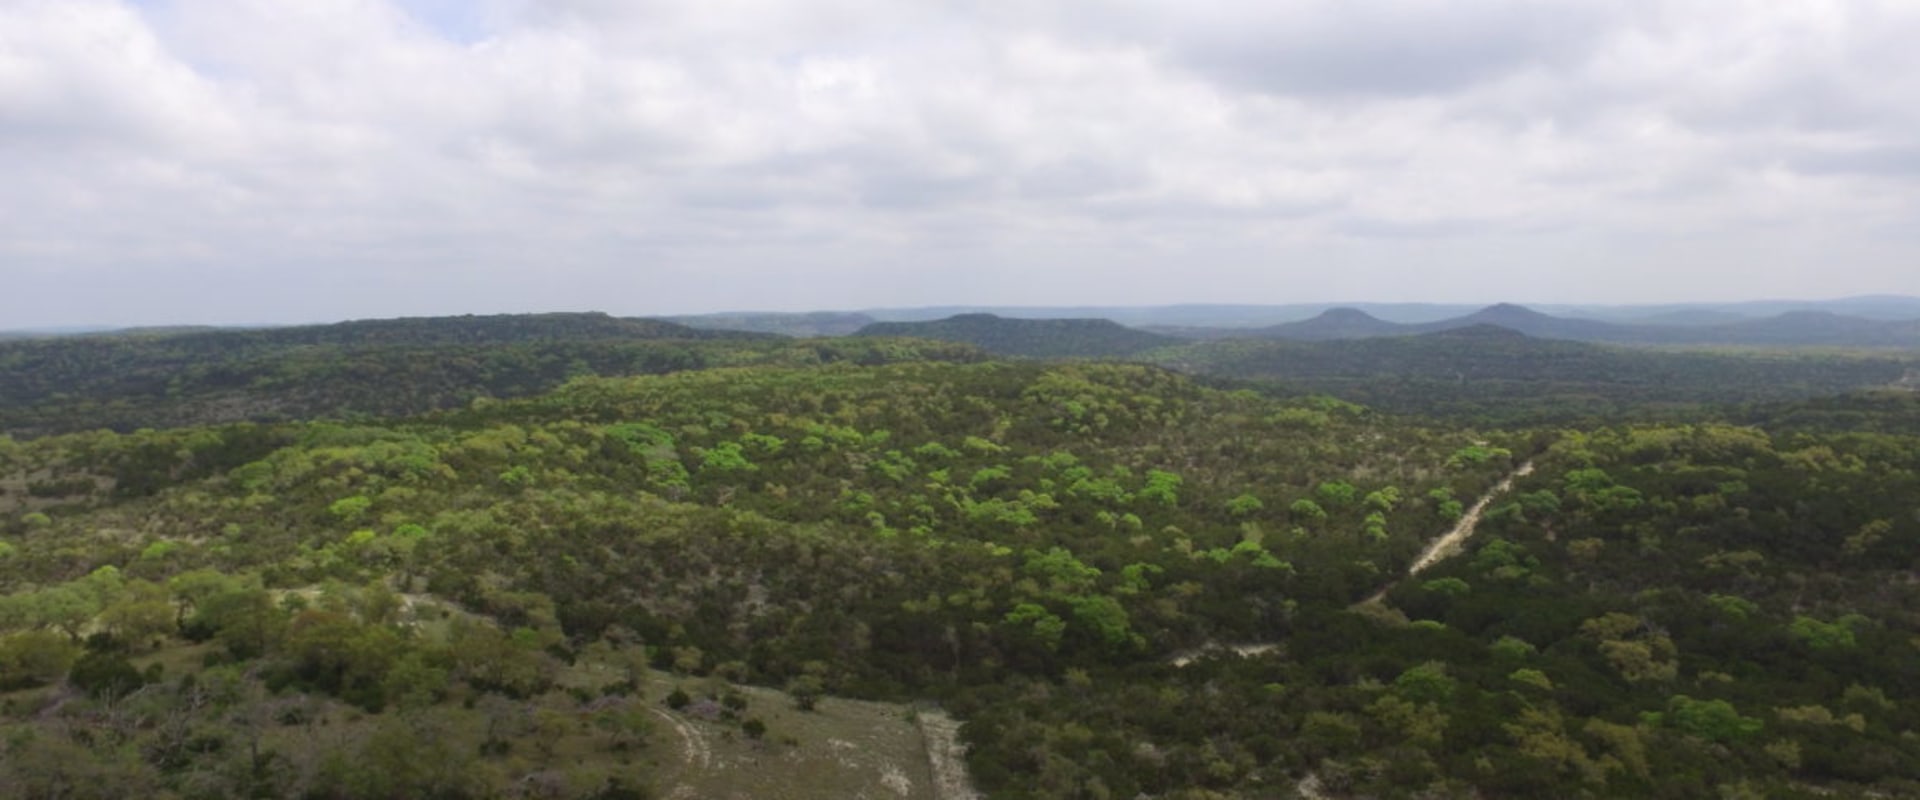 Baptists in Bexar County, TX: Environmentalism and Conservation - A Closer Look